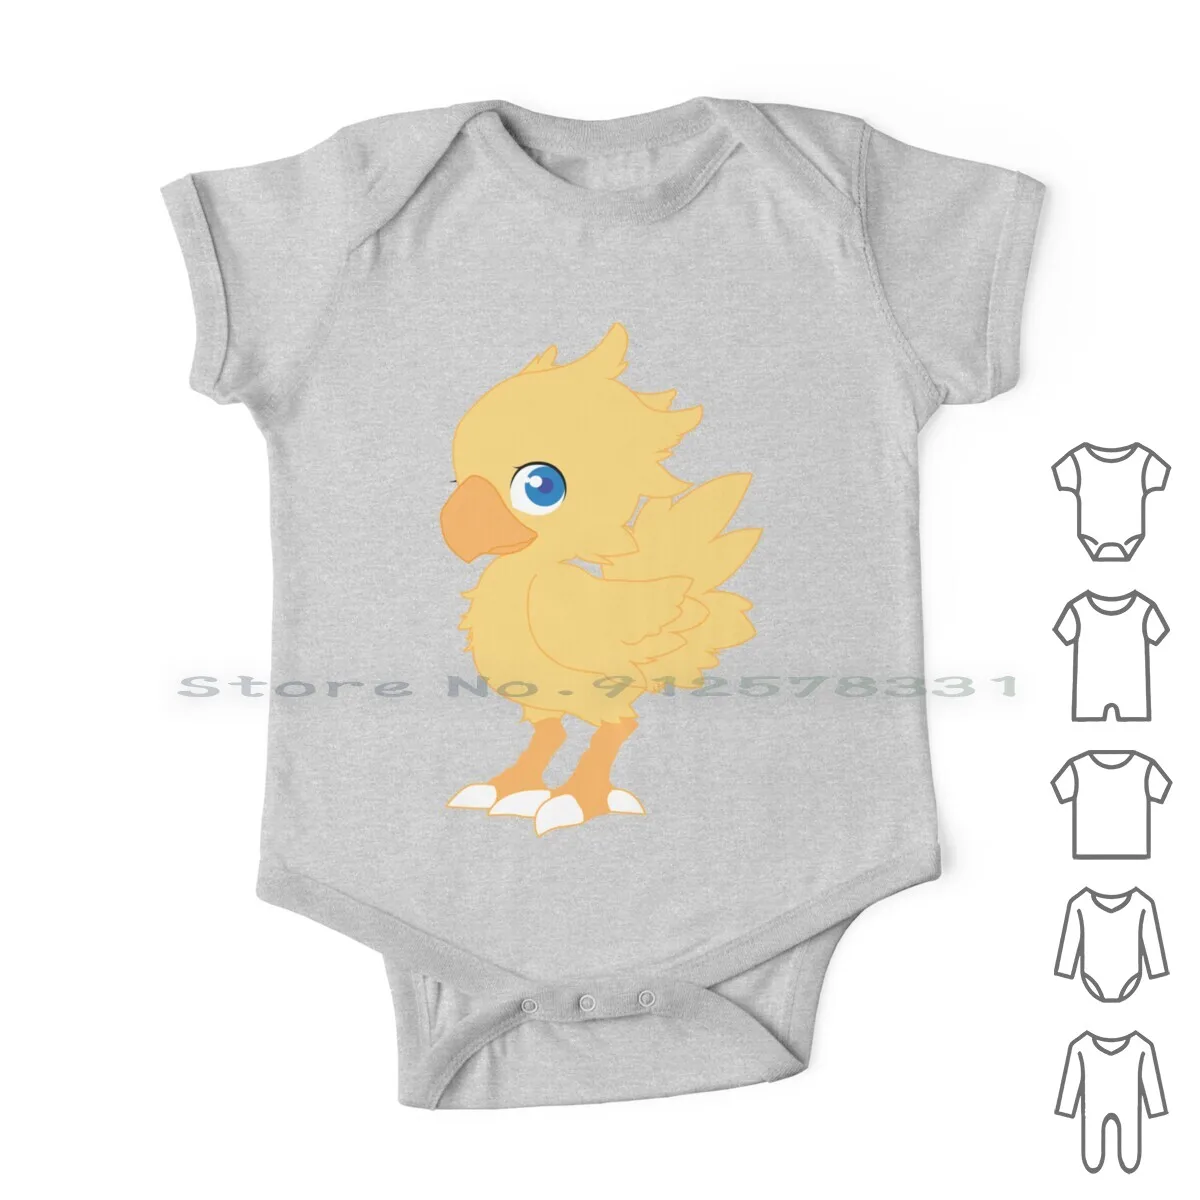 

Chocobo Newborn Baby Clothes Rompers Cotton Jumpsuits Chocobo Final Fantasy Anime Gaming Cute Chibi Kawaii Bird Chicken Pattern